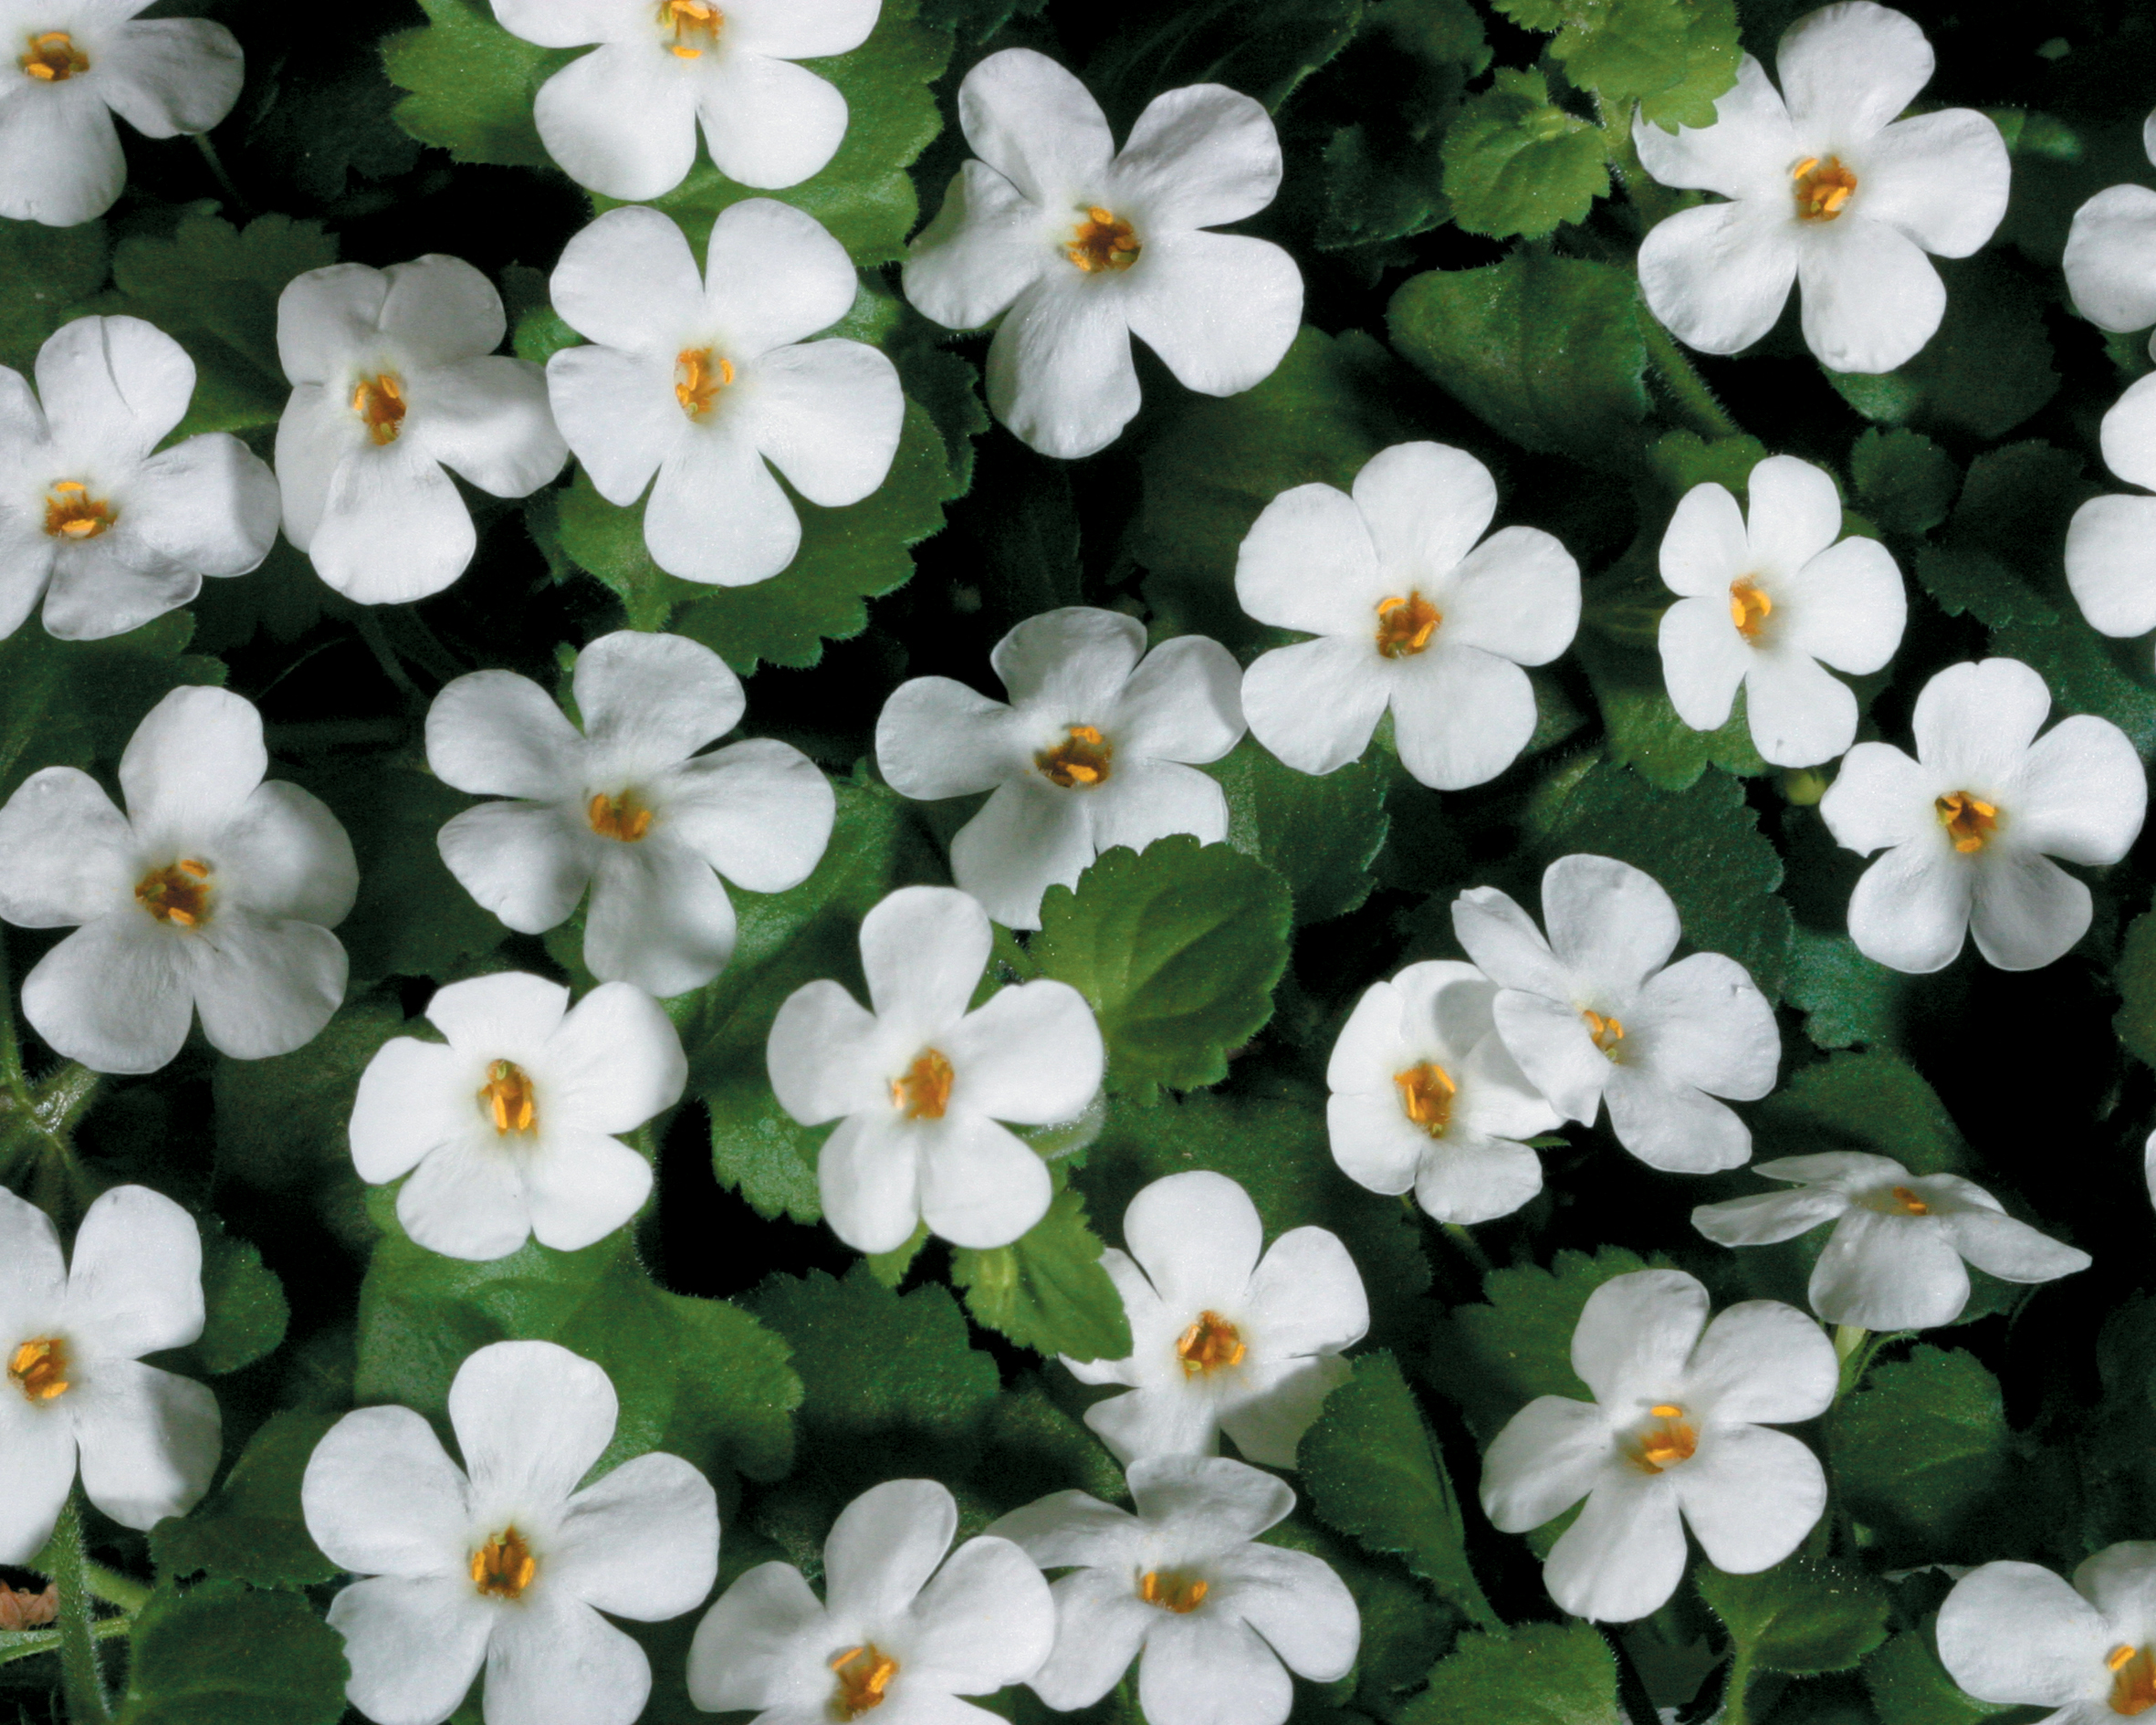 4.25 in. Eco+Grande, Snowstorm Giant Snowflake Bacopa (Sutera) Live Plant, White Flowers (4-Pack) - image 3 of 9